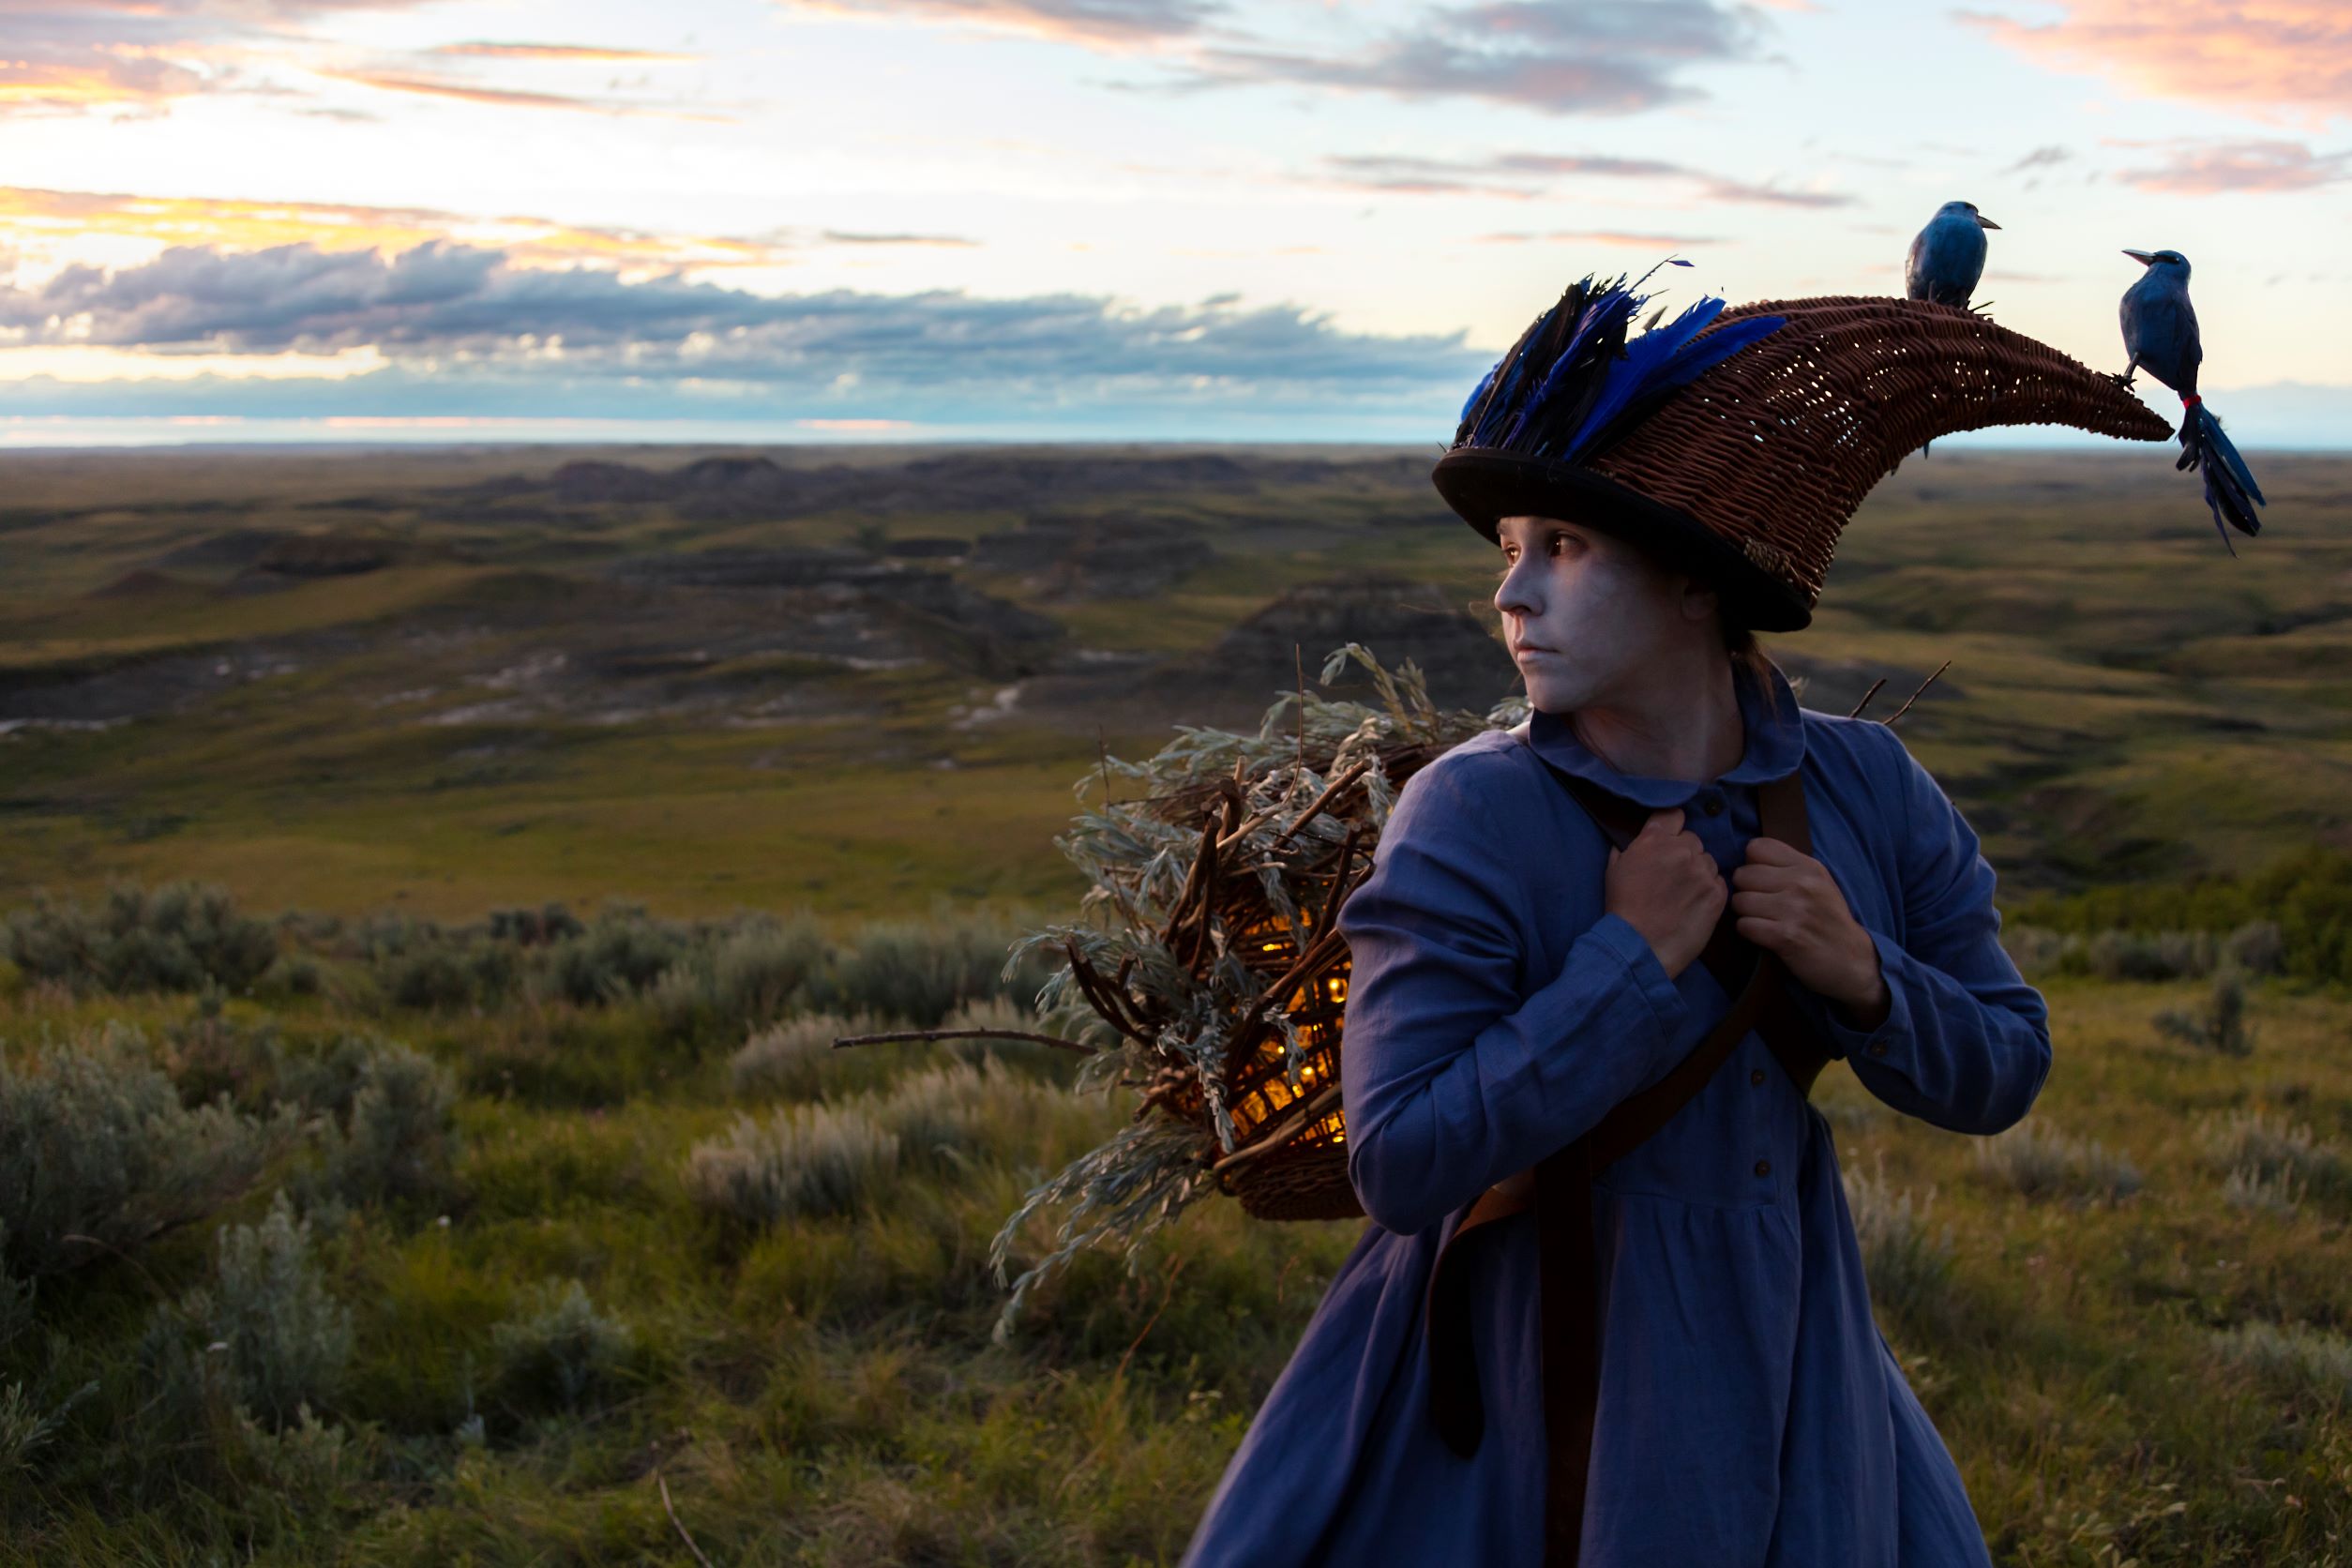 Person wearing a blue dress, a wicker headpiece where two blue birds are perched and a backpack made of sticks and filled with light stands on a grassy hill against a cloudy sky.